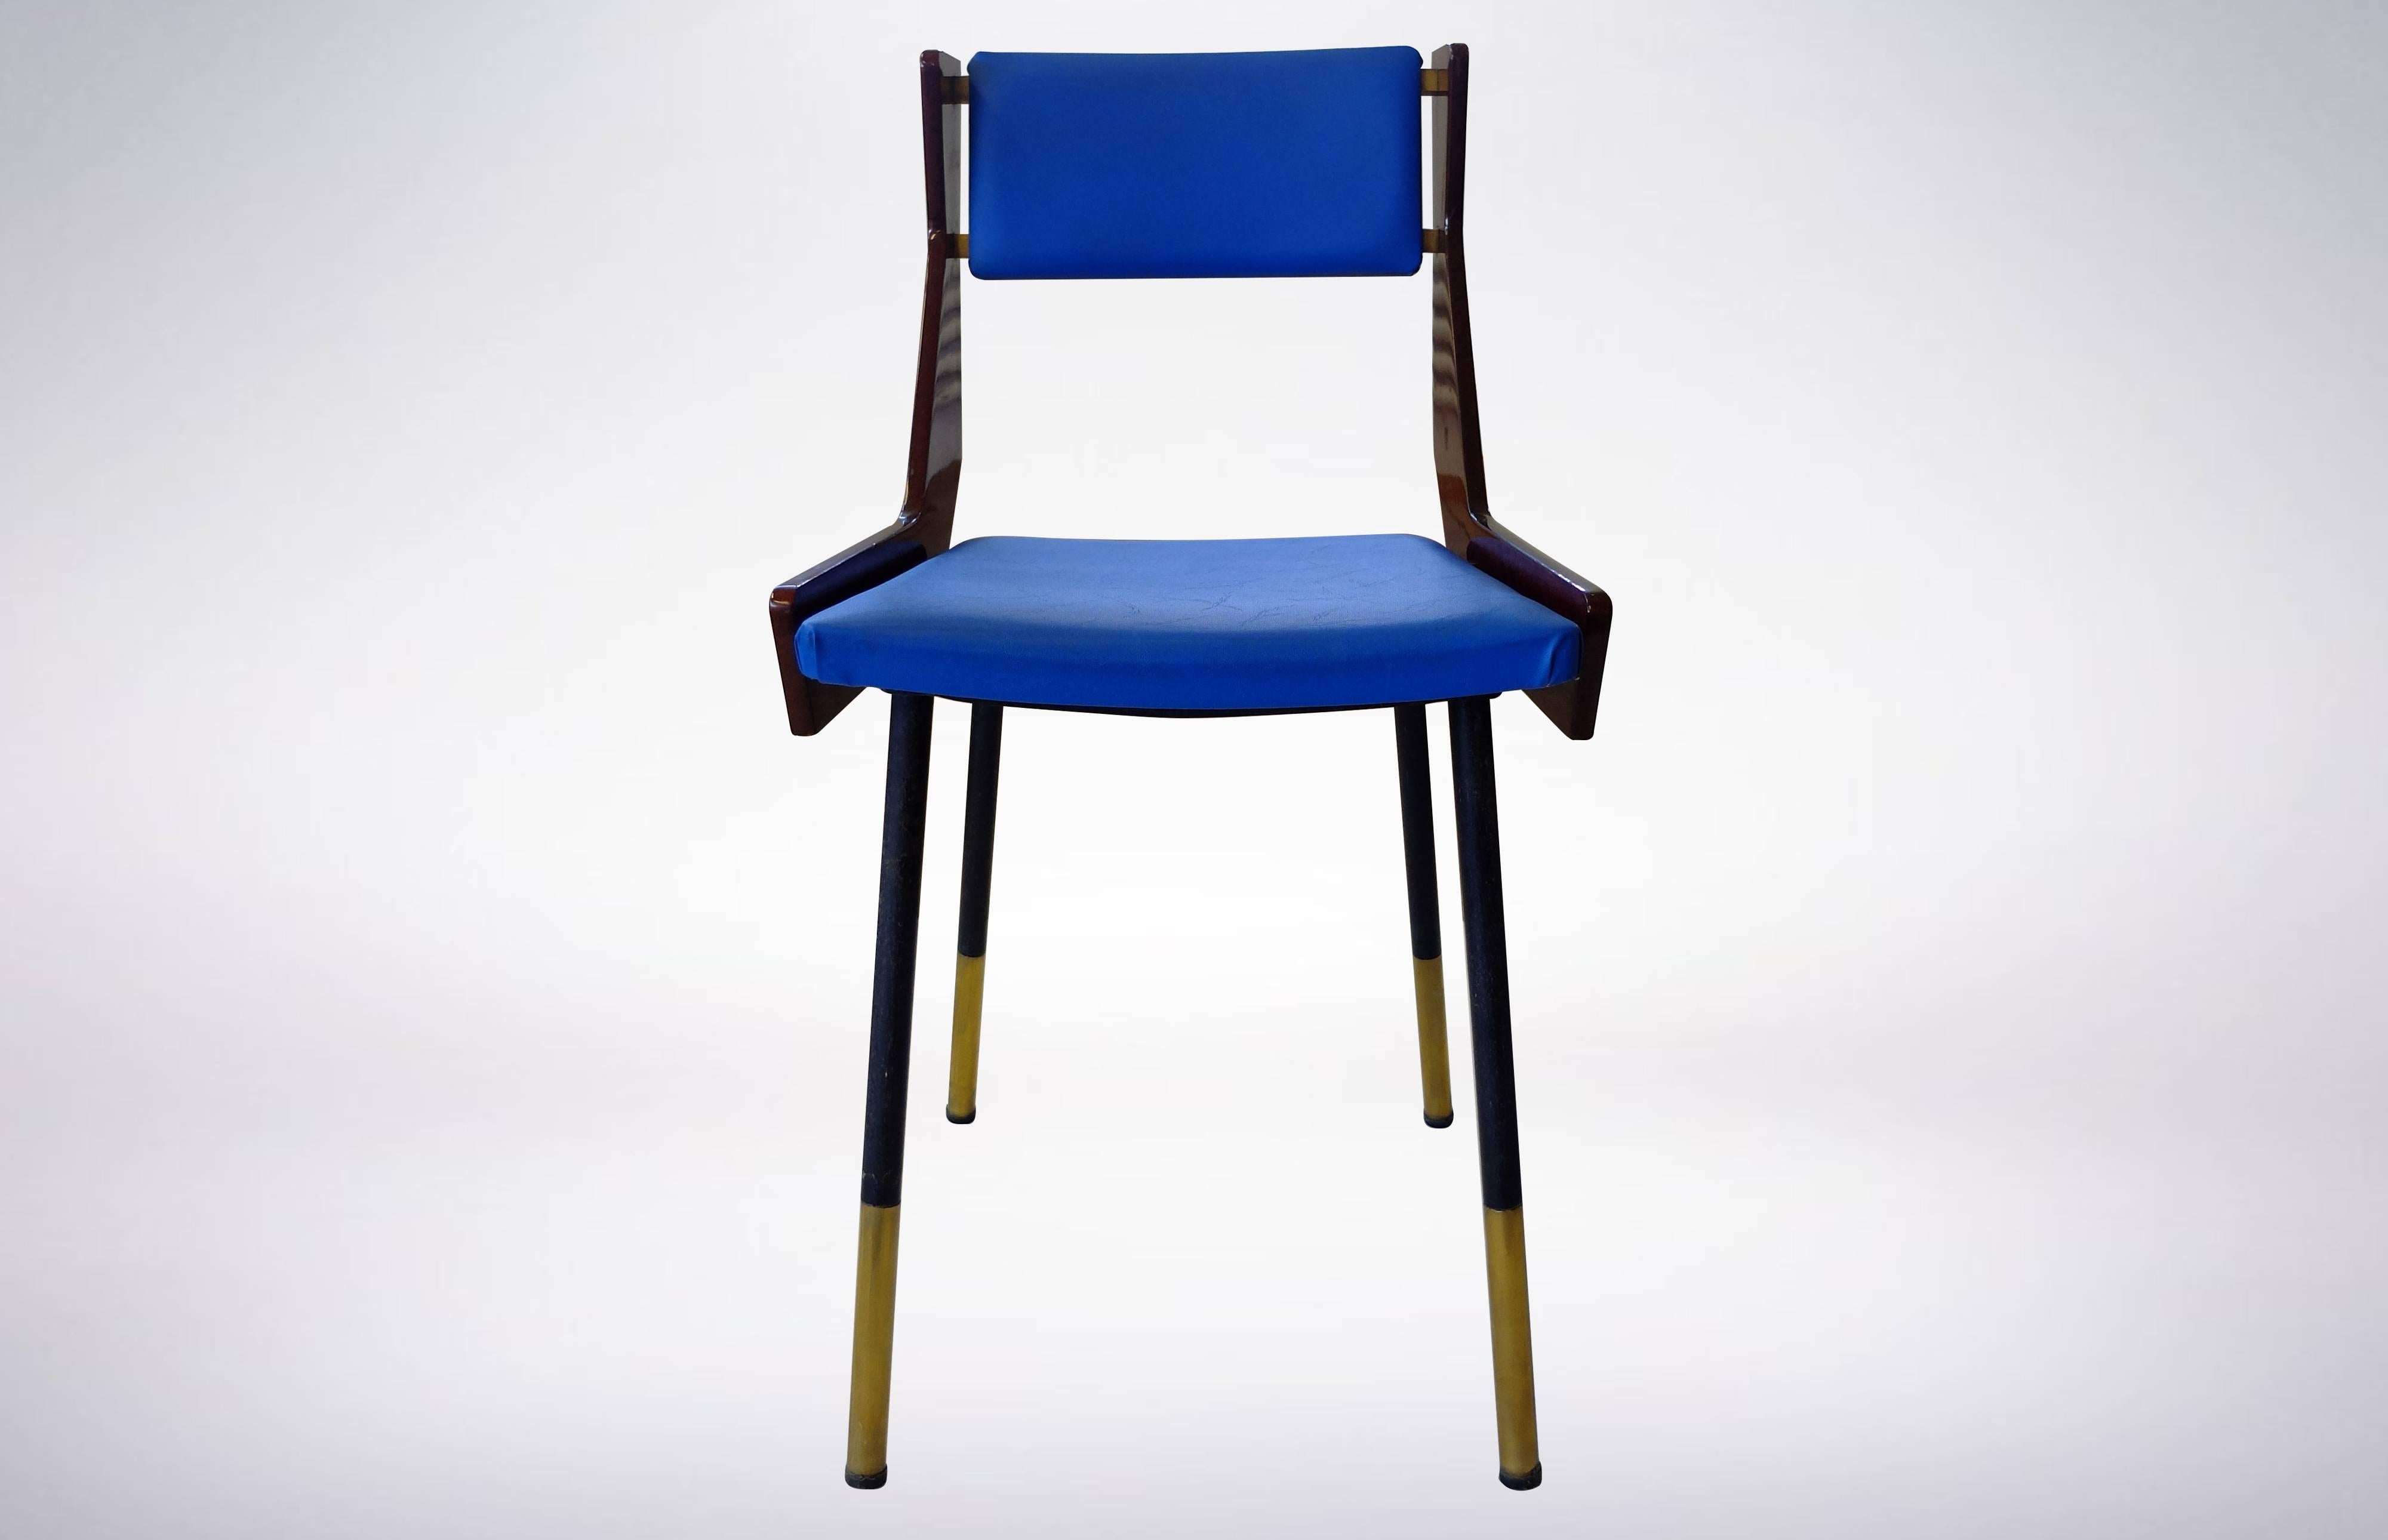 Rare exemplars of six chairs created by Gianfranco Frattini in the 1950s, upholstered in lush blue leather, with elegant brass details on the sides.